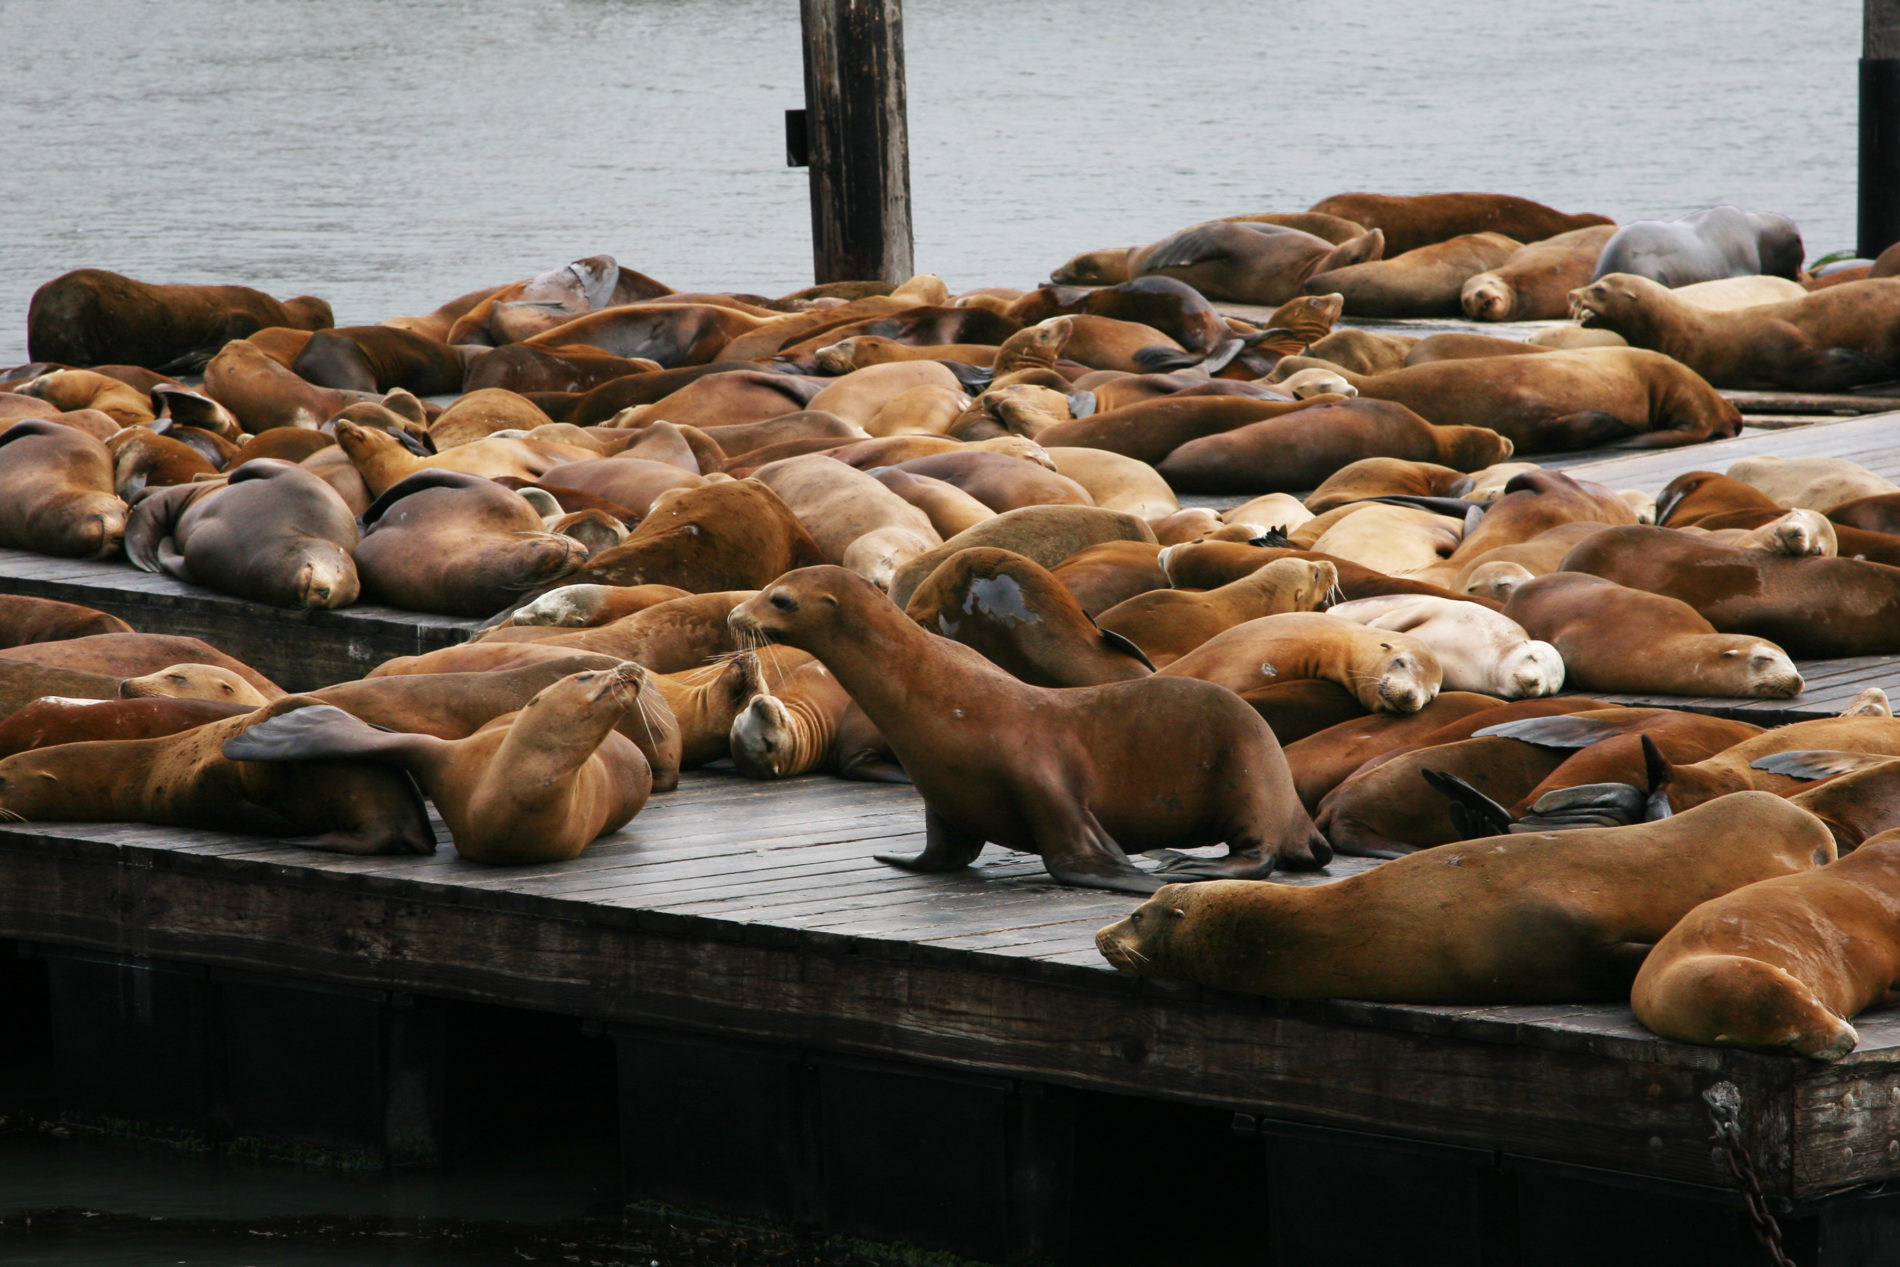 Sea lions on the docks at Pier 39 in San Francisco.